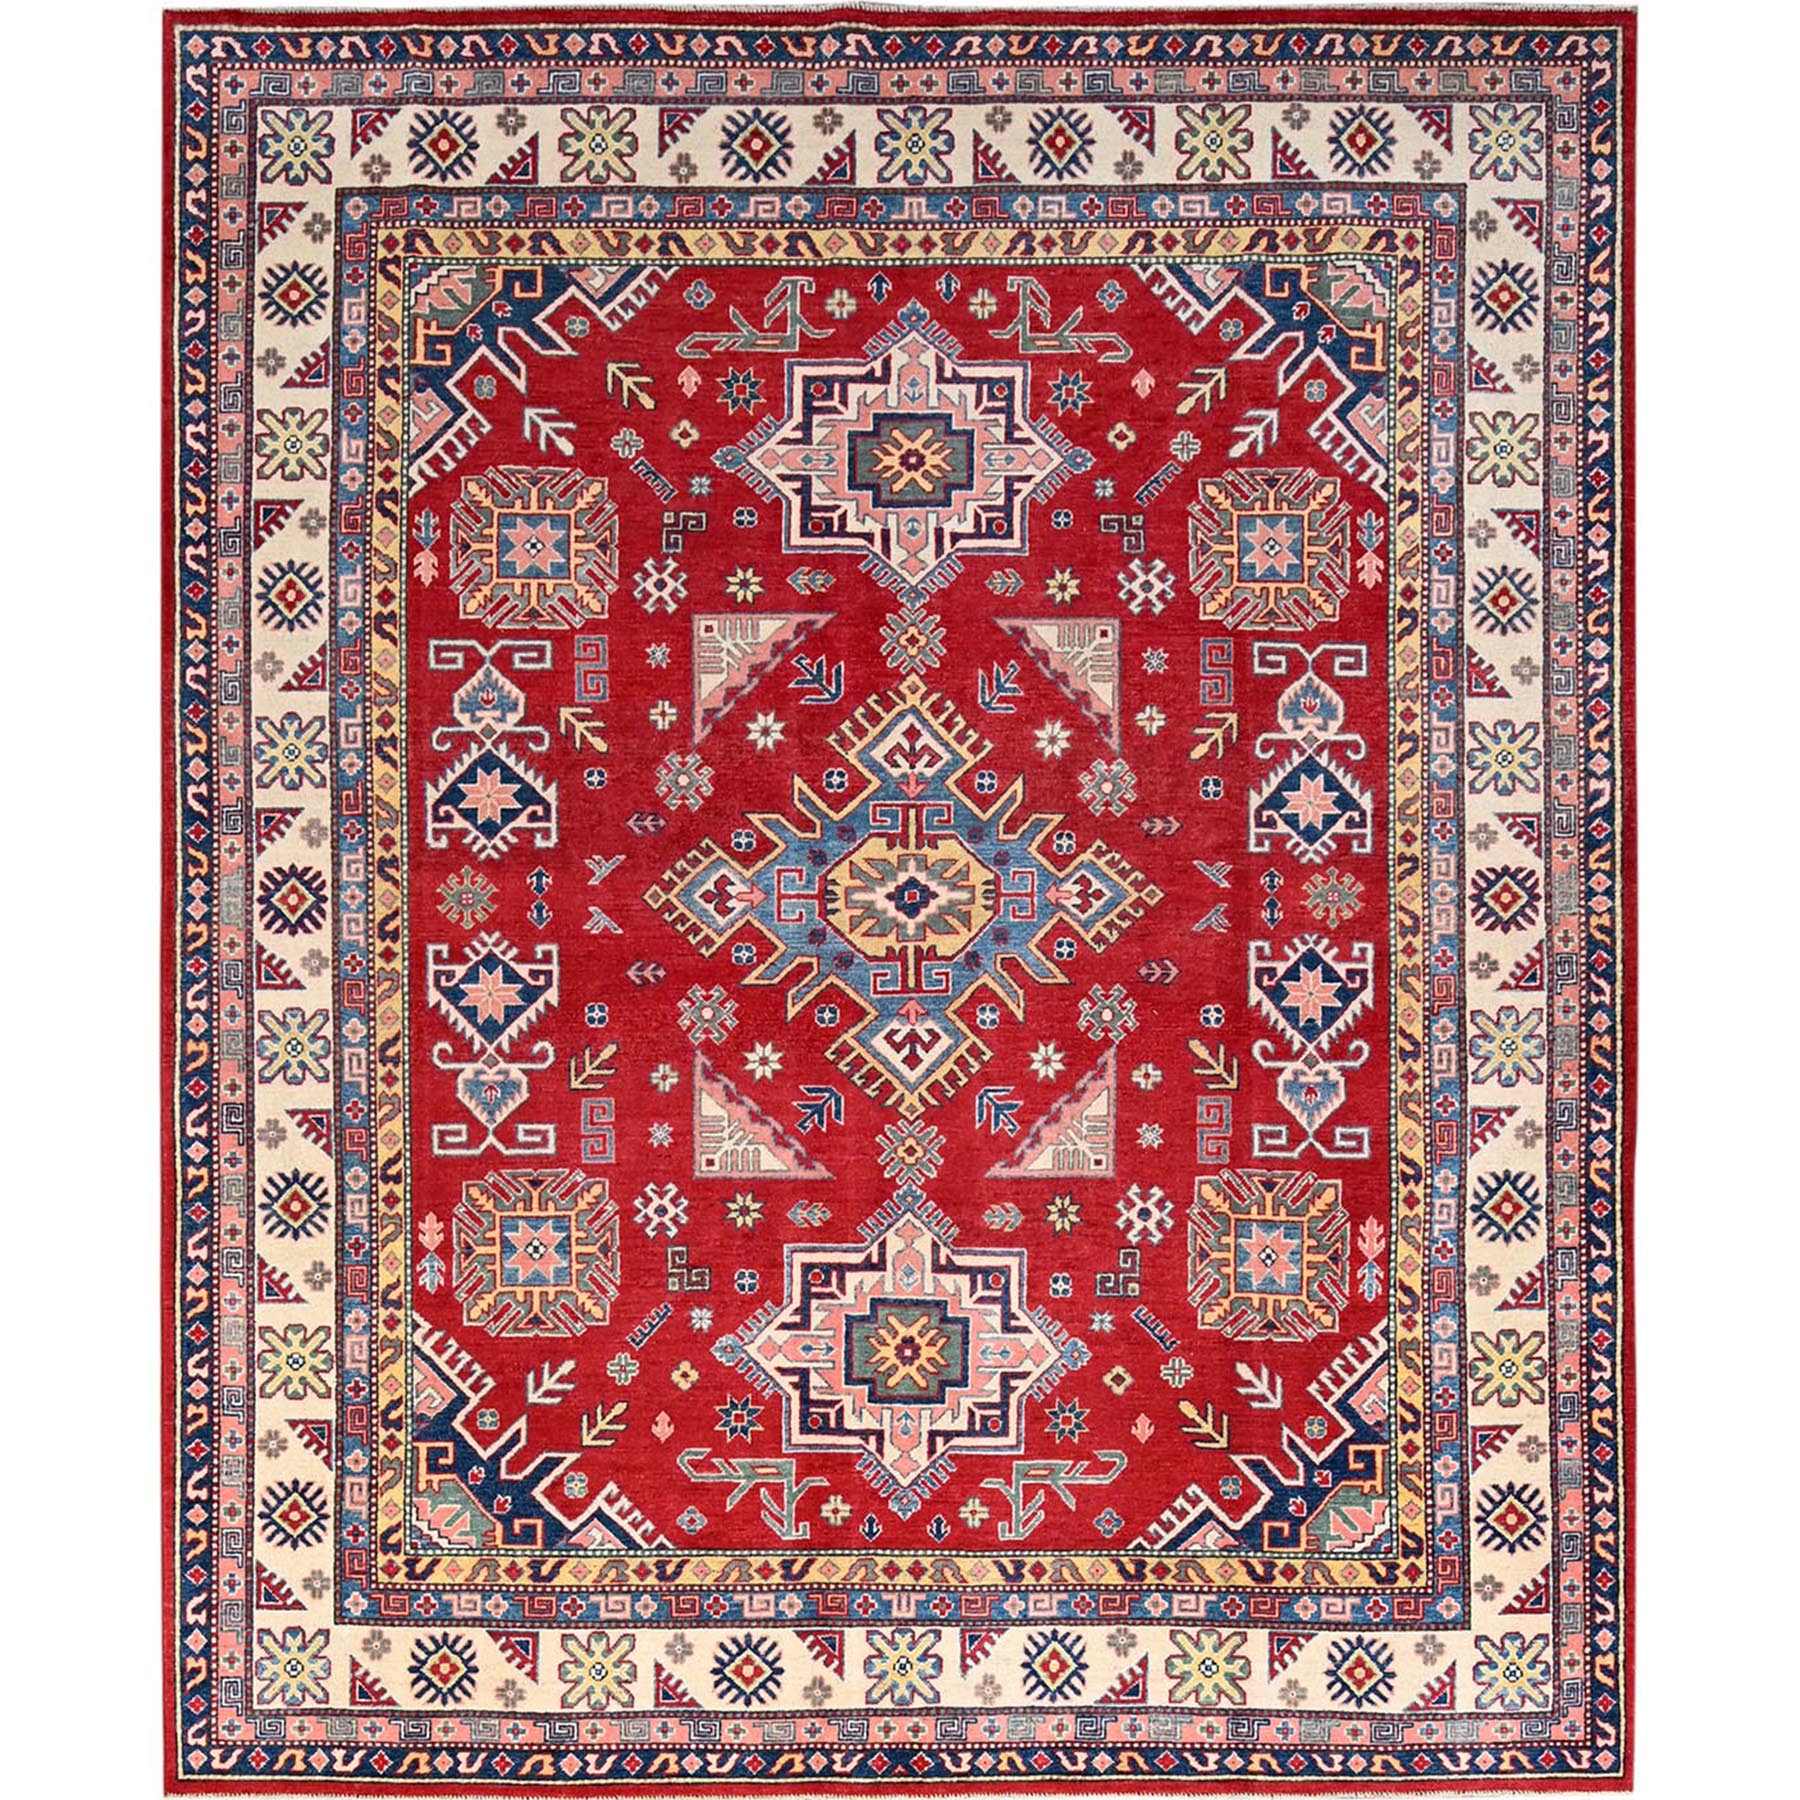 Scarlet Red With Vanilla Blush Pink Border, Natural Dyes, Pure Wool, Hand Knotted Kazak Design With Tribal Medallions, Oriental Rug